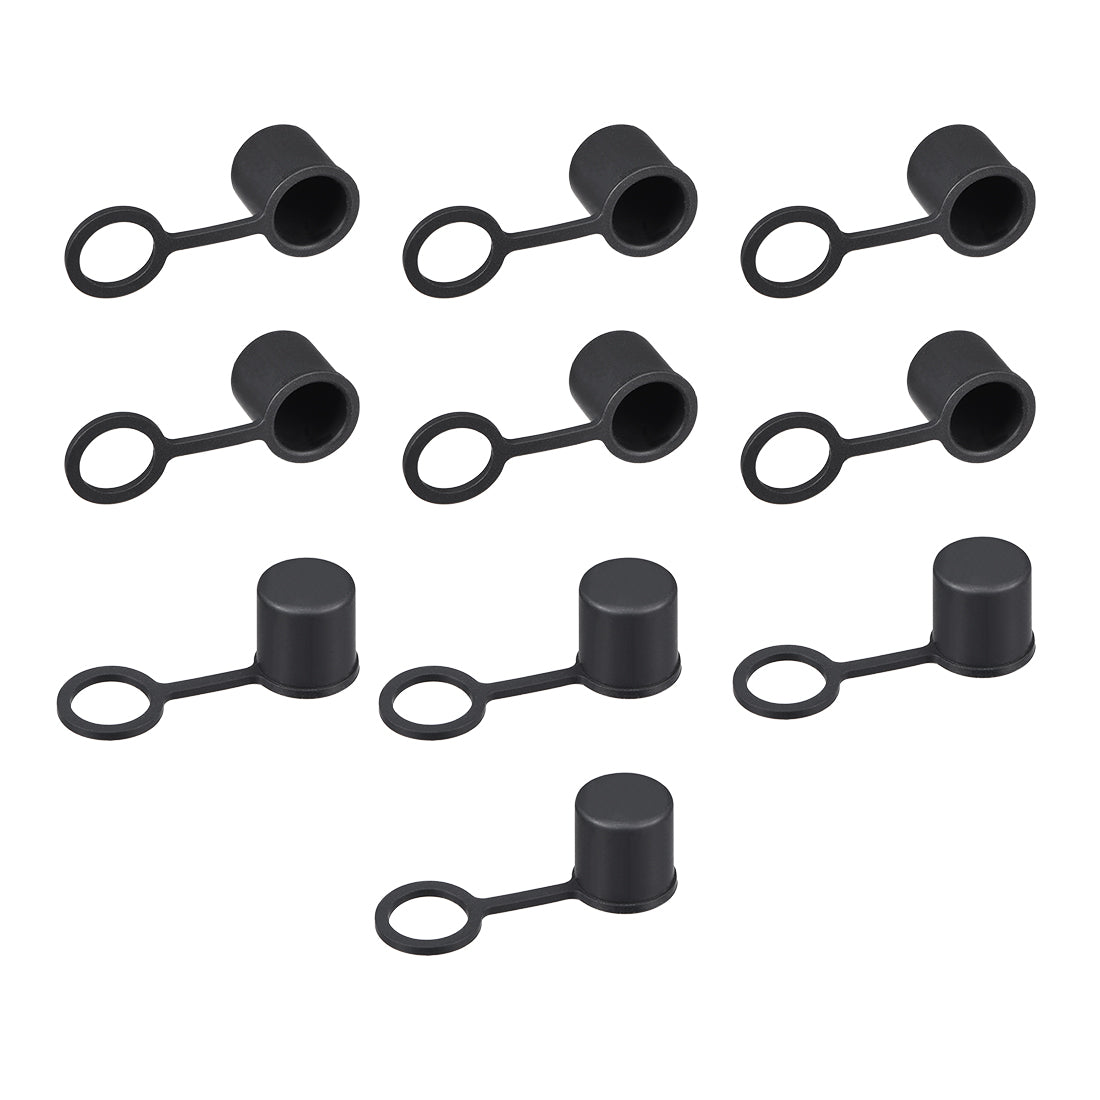 uxcell Uxcell Silicone BNC-B Anti-Dust Stopper Cap Cover for Female Jack Black 10pcs